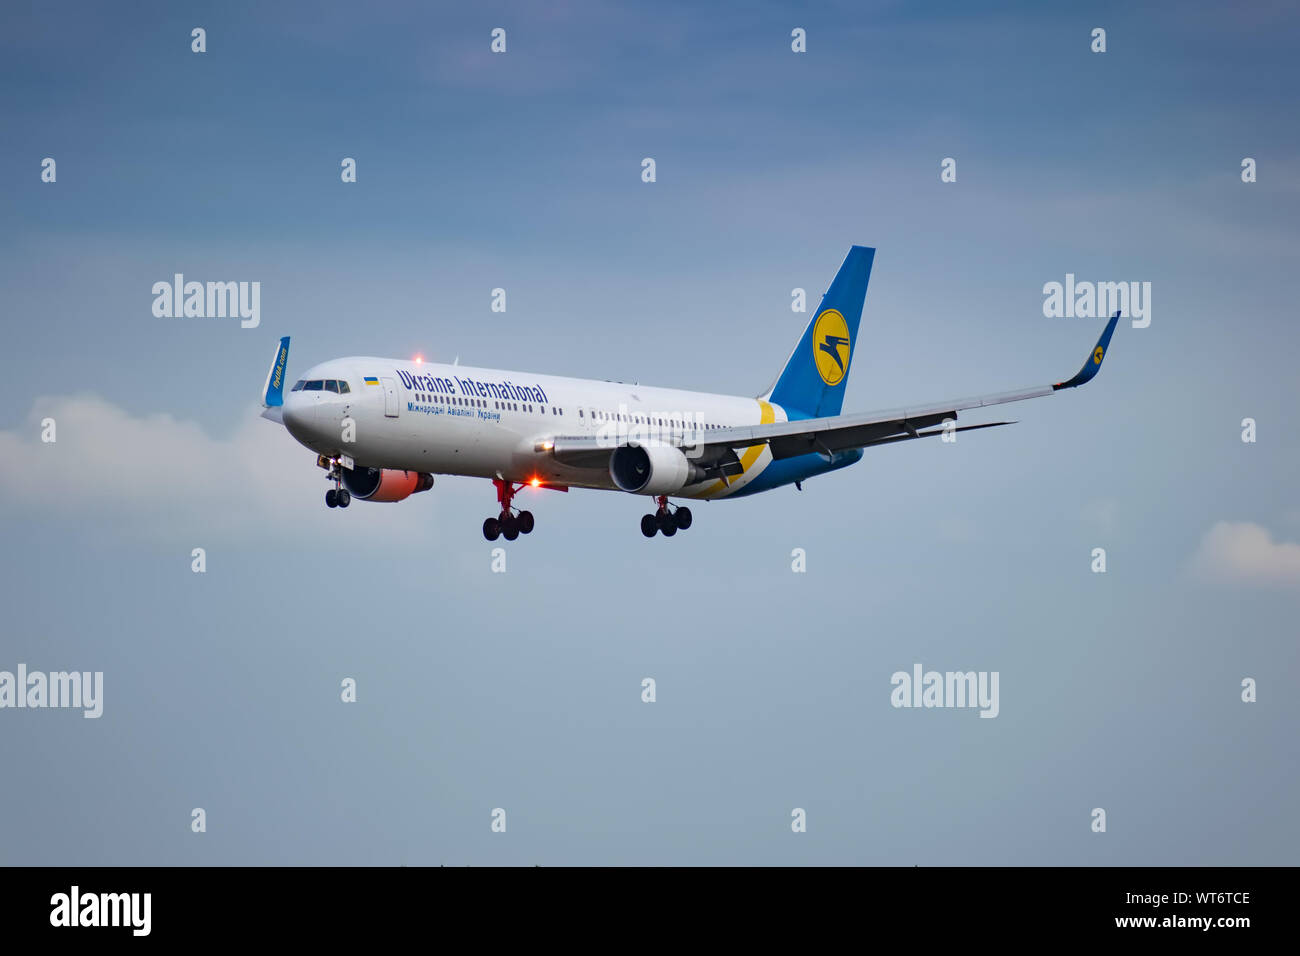 Boryspil, Ukraine - August 3, 2019: Ukraine International Airlines Boeing 767 is langing in the airport Stock Photo